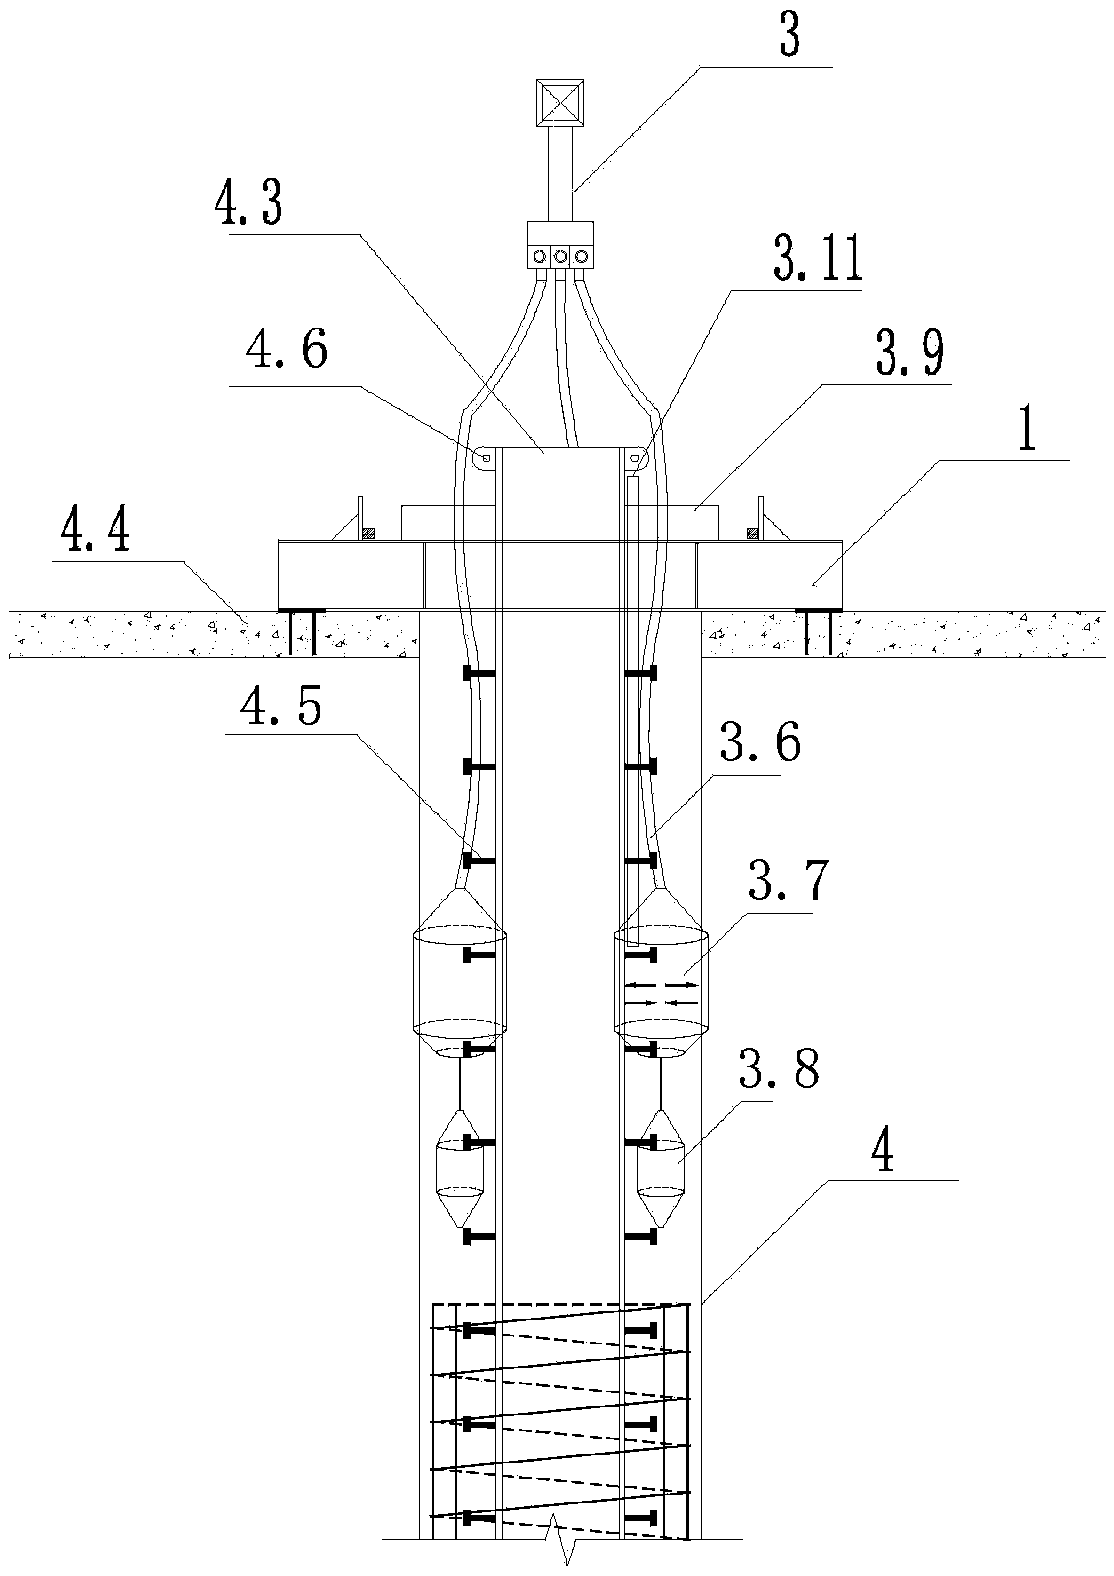 One-column-with-one-pile steel column positioning verticality-adjusting system and construction method based on reverse construction method